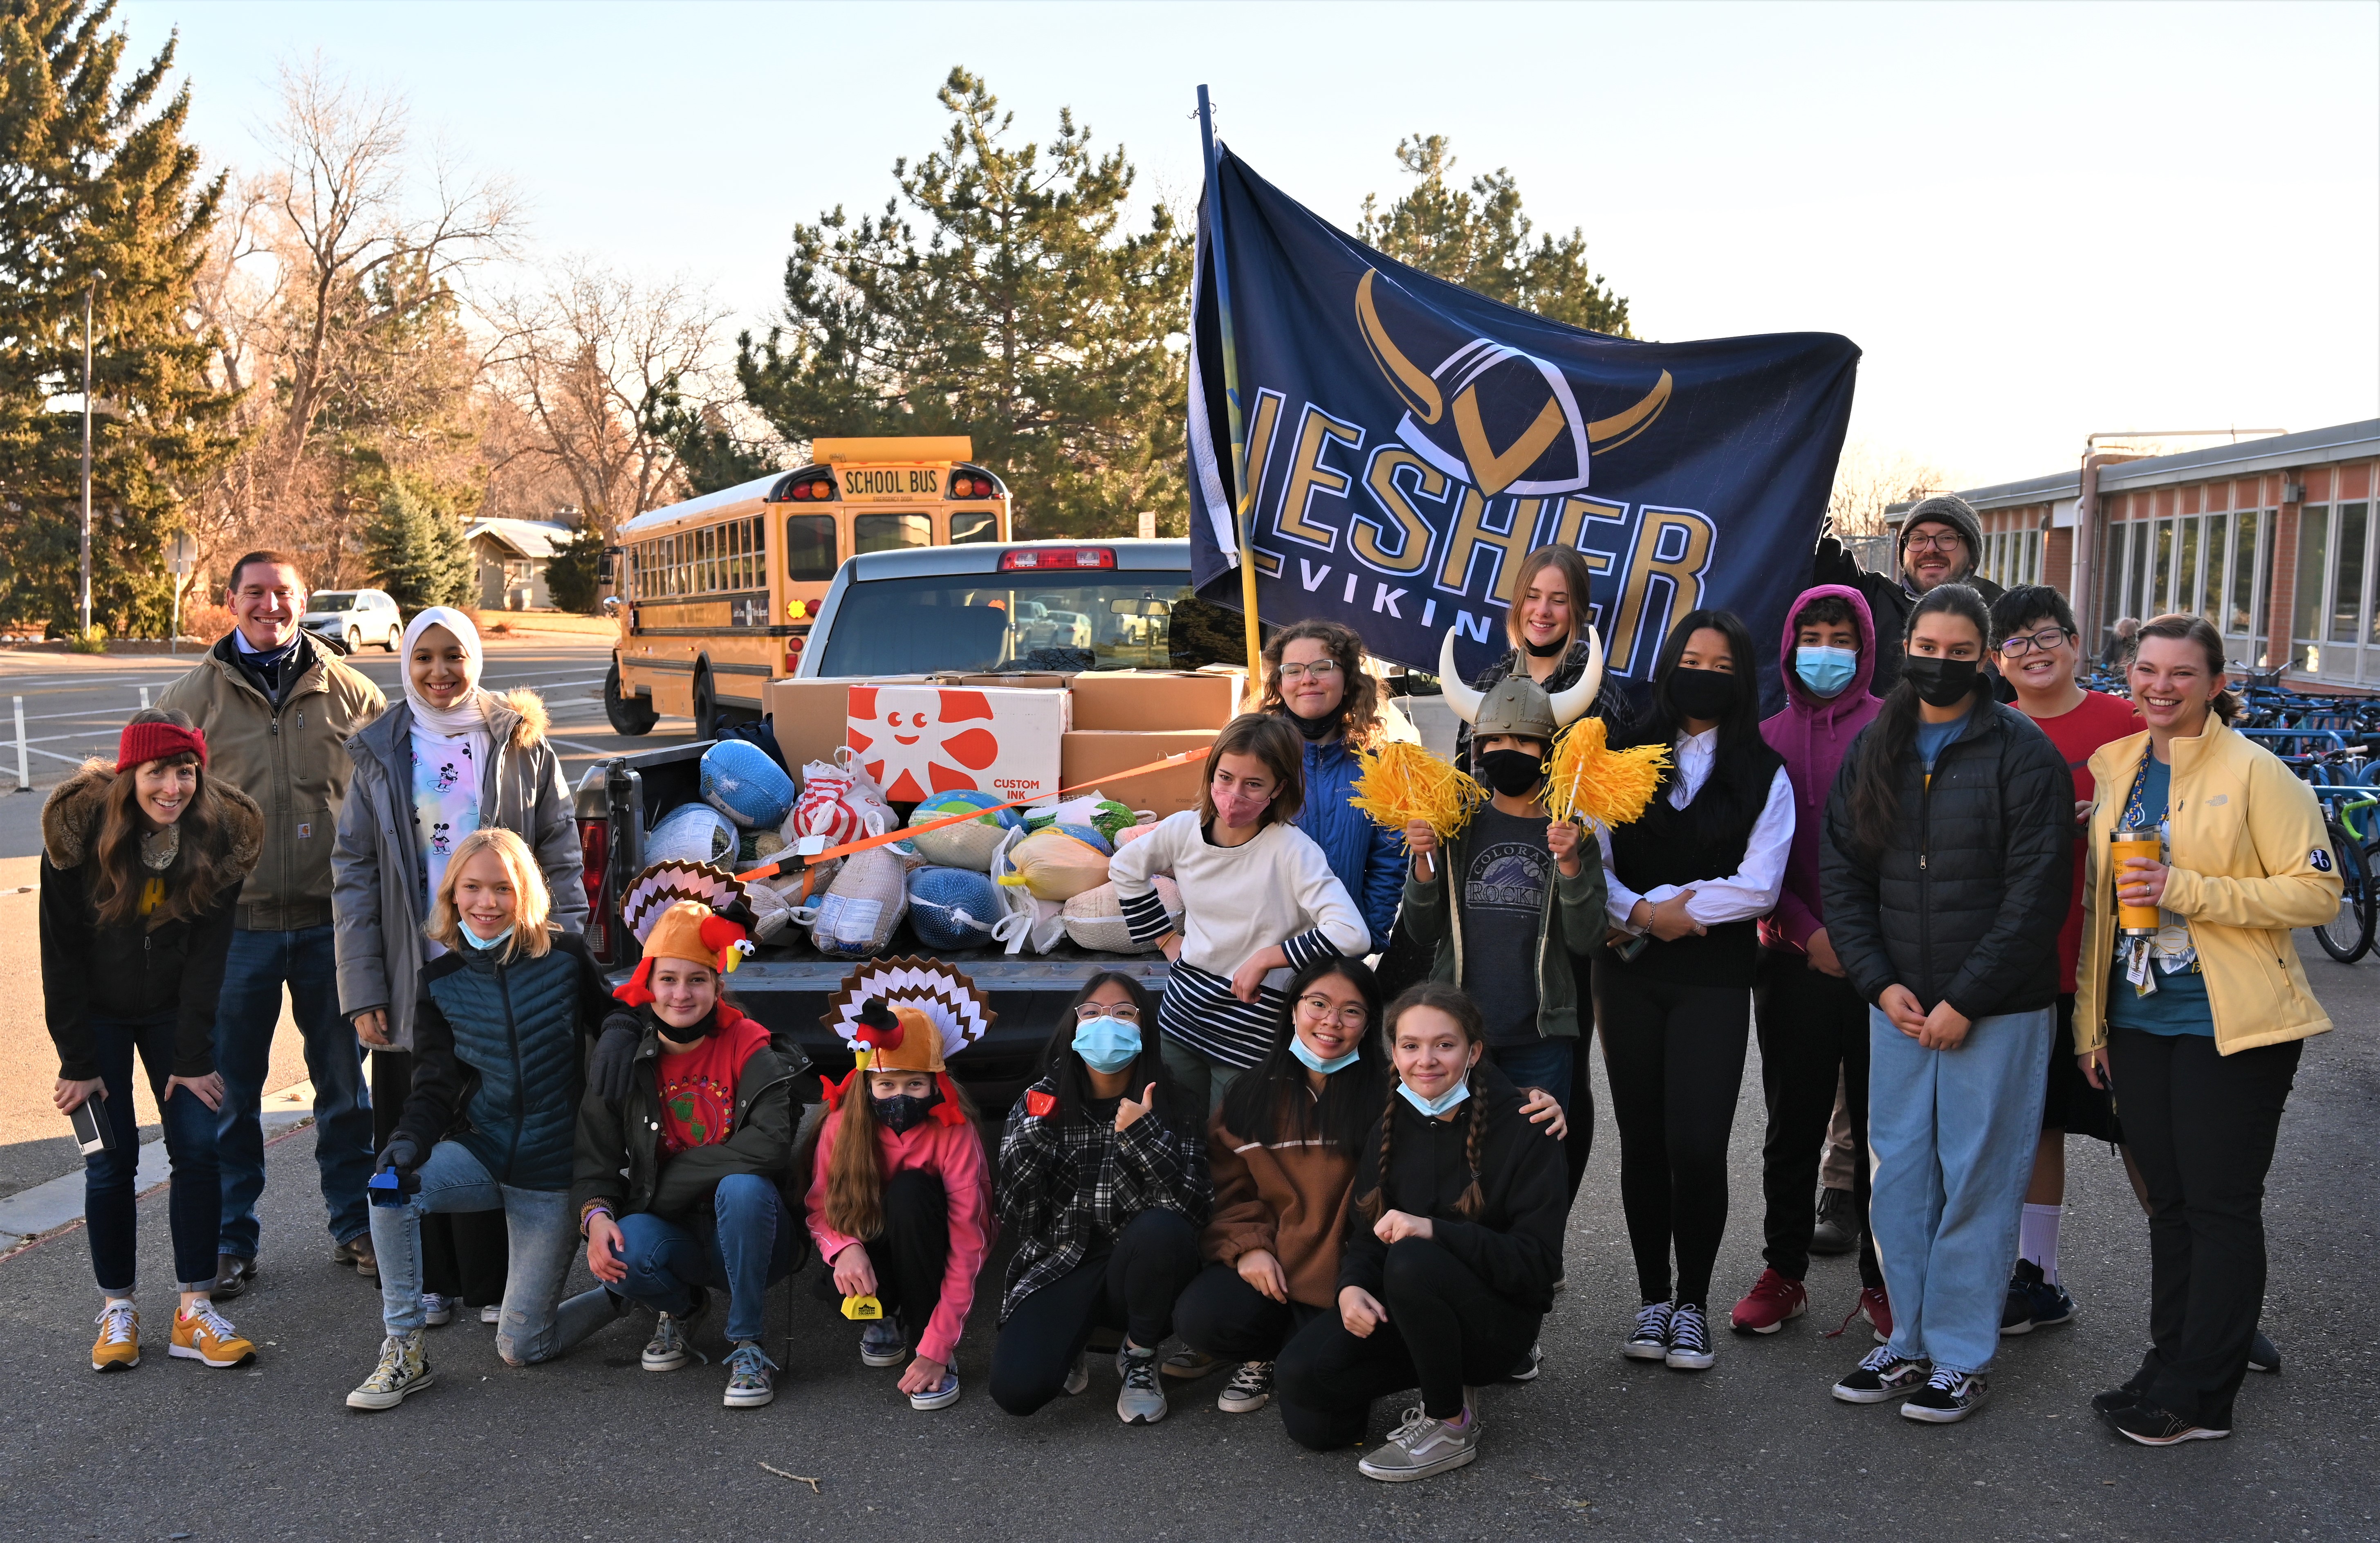 Lesher Middle School students and staff in front of the truck filled with turkeys.